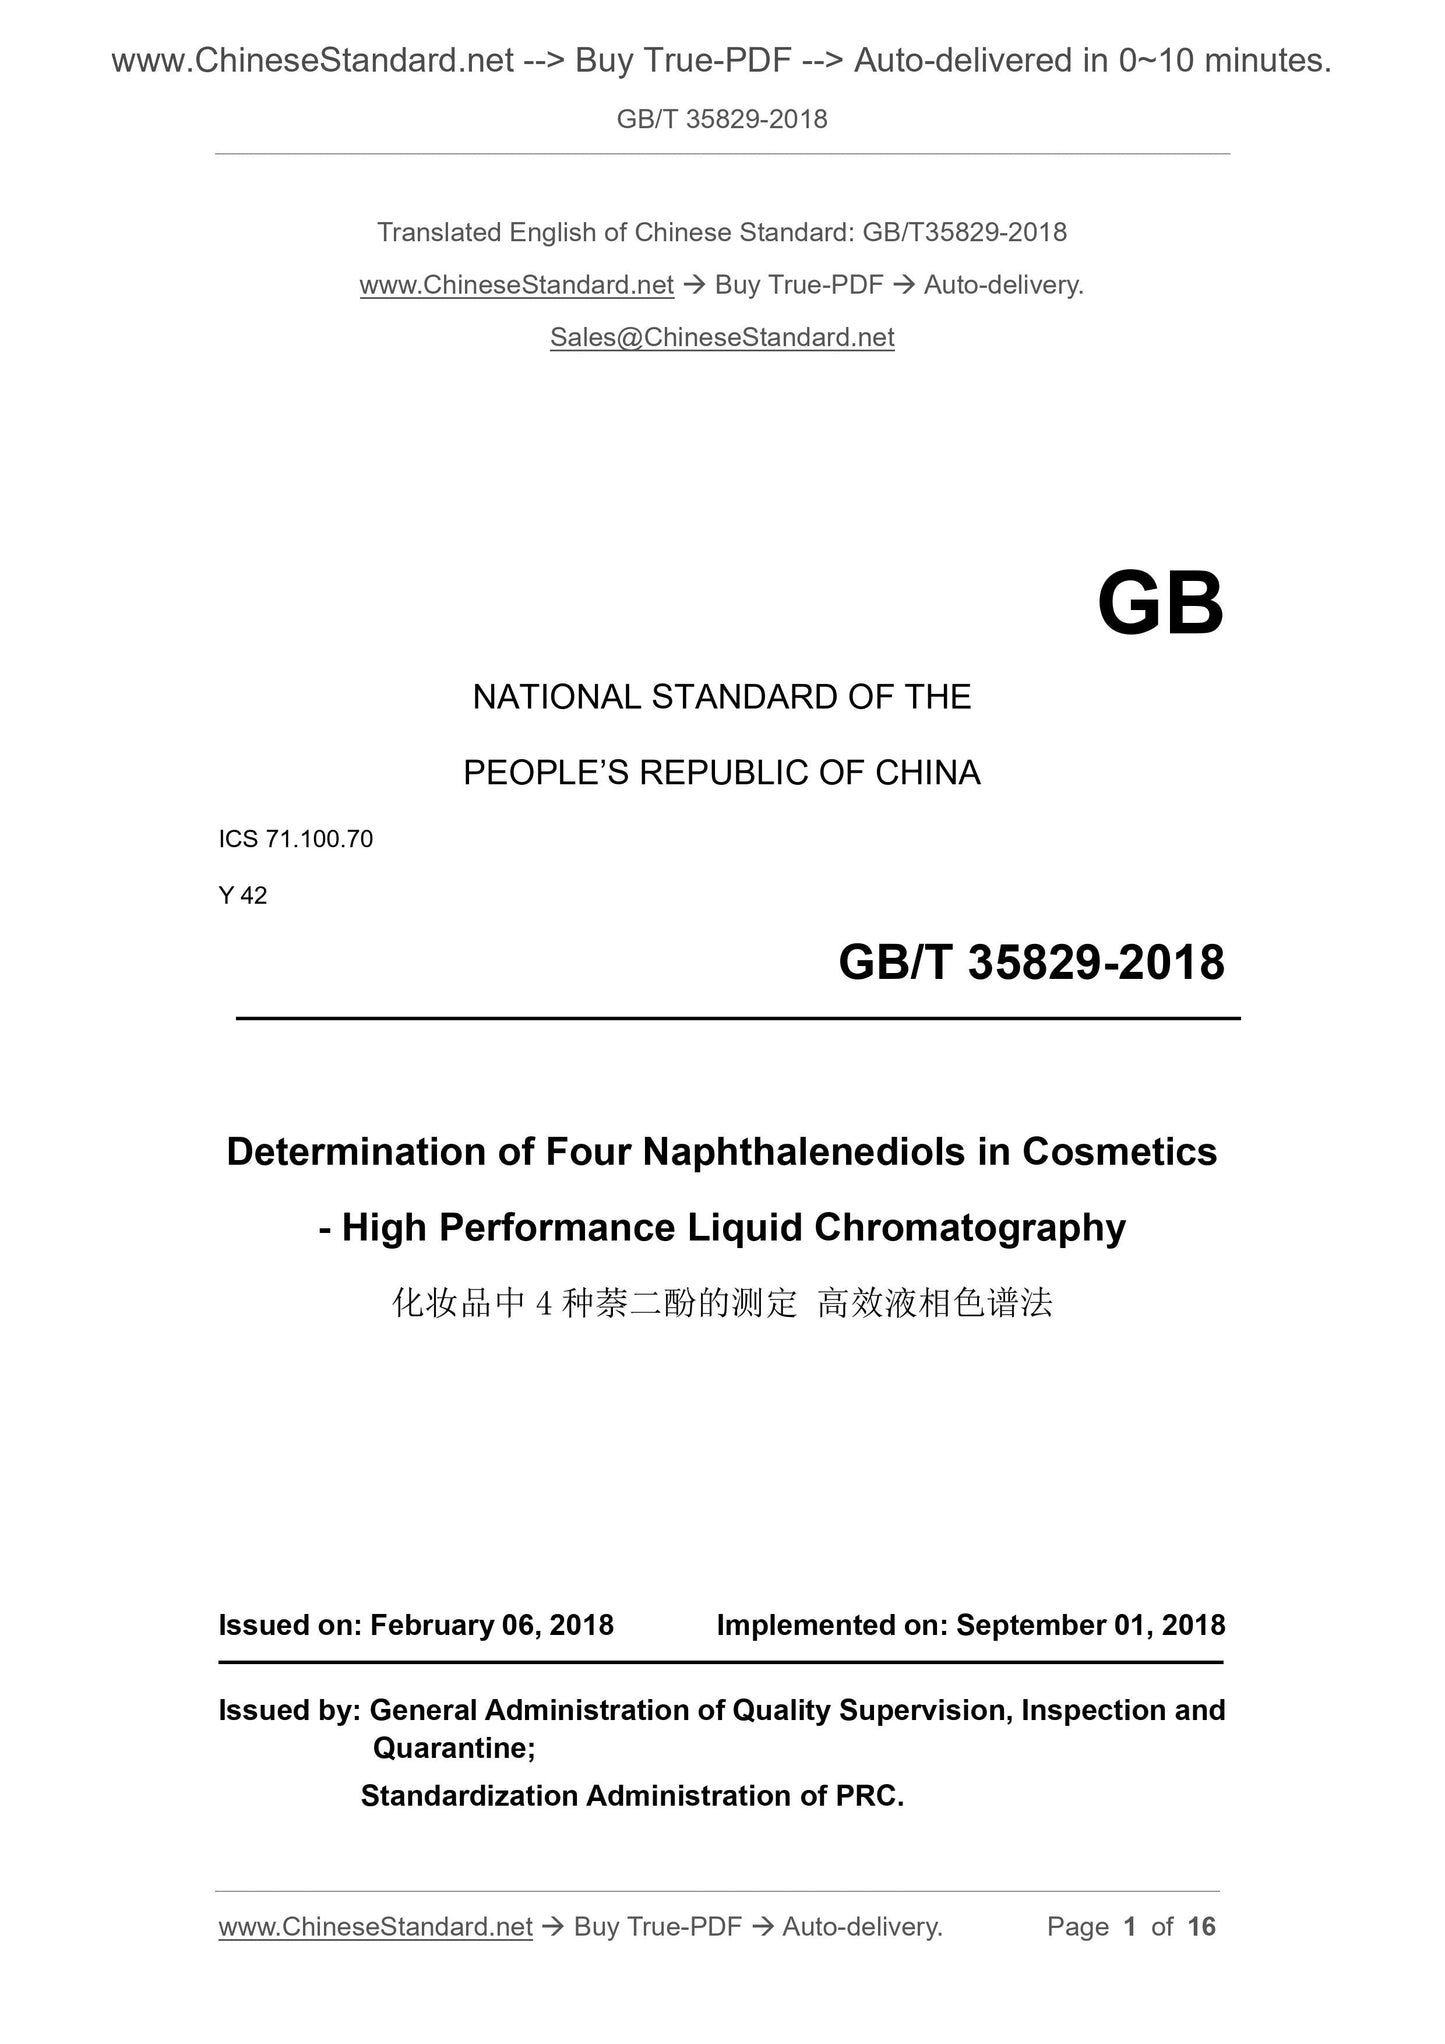 GB/T 35829-2018 Page 1